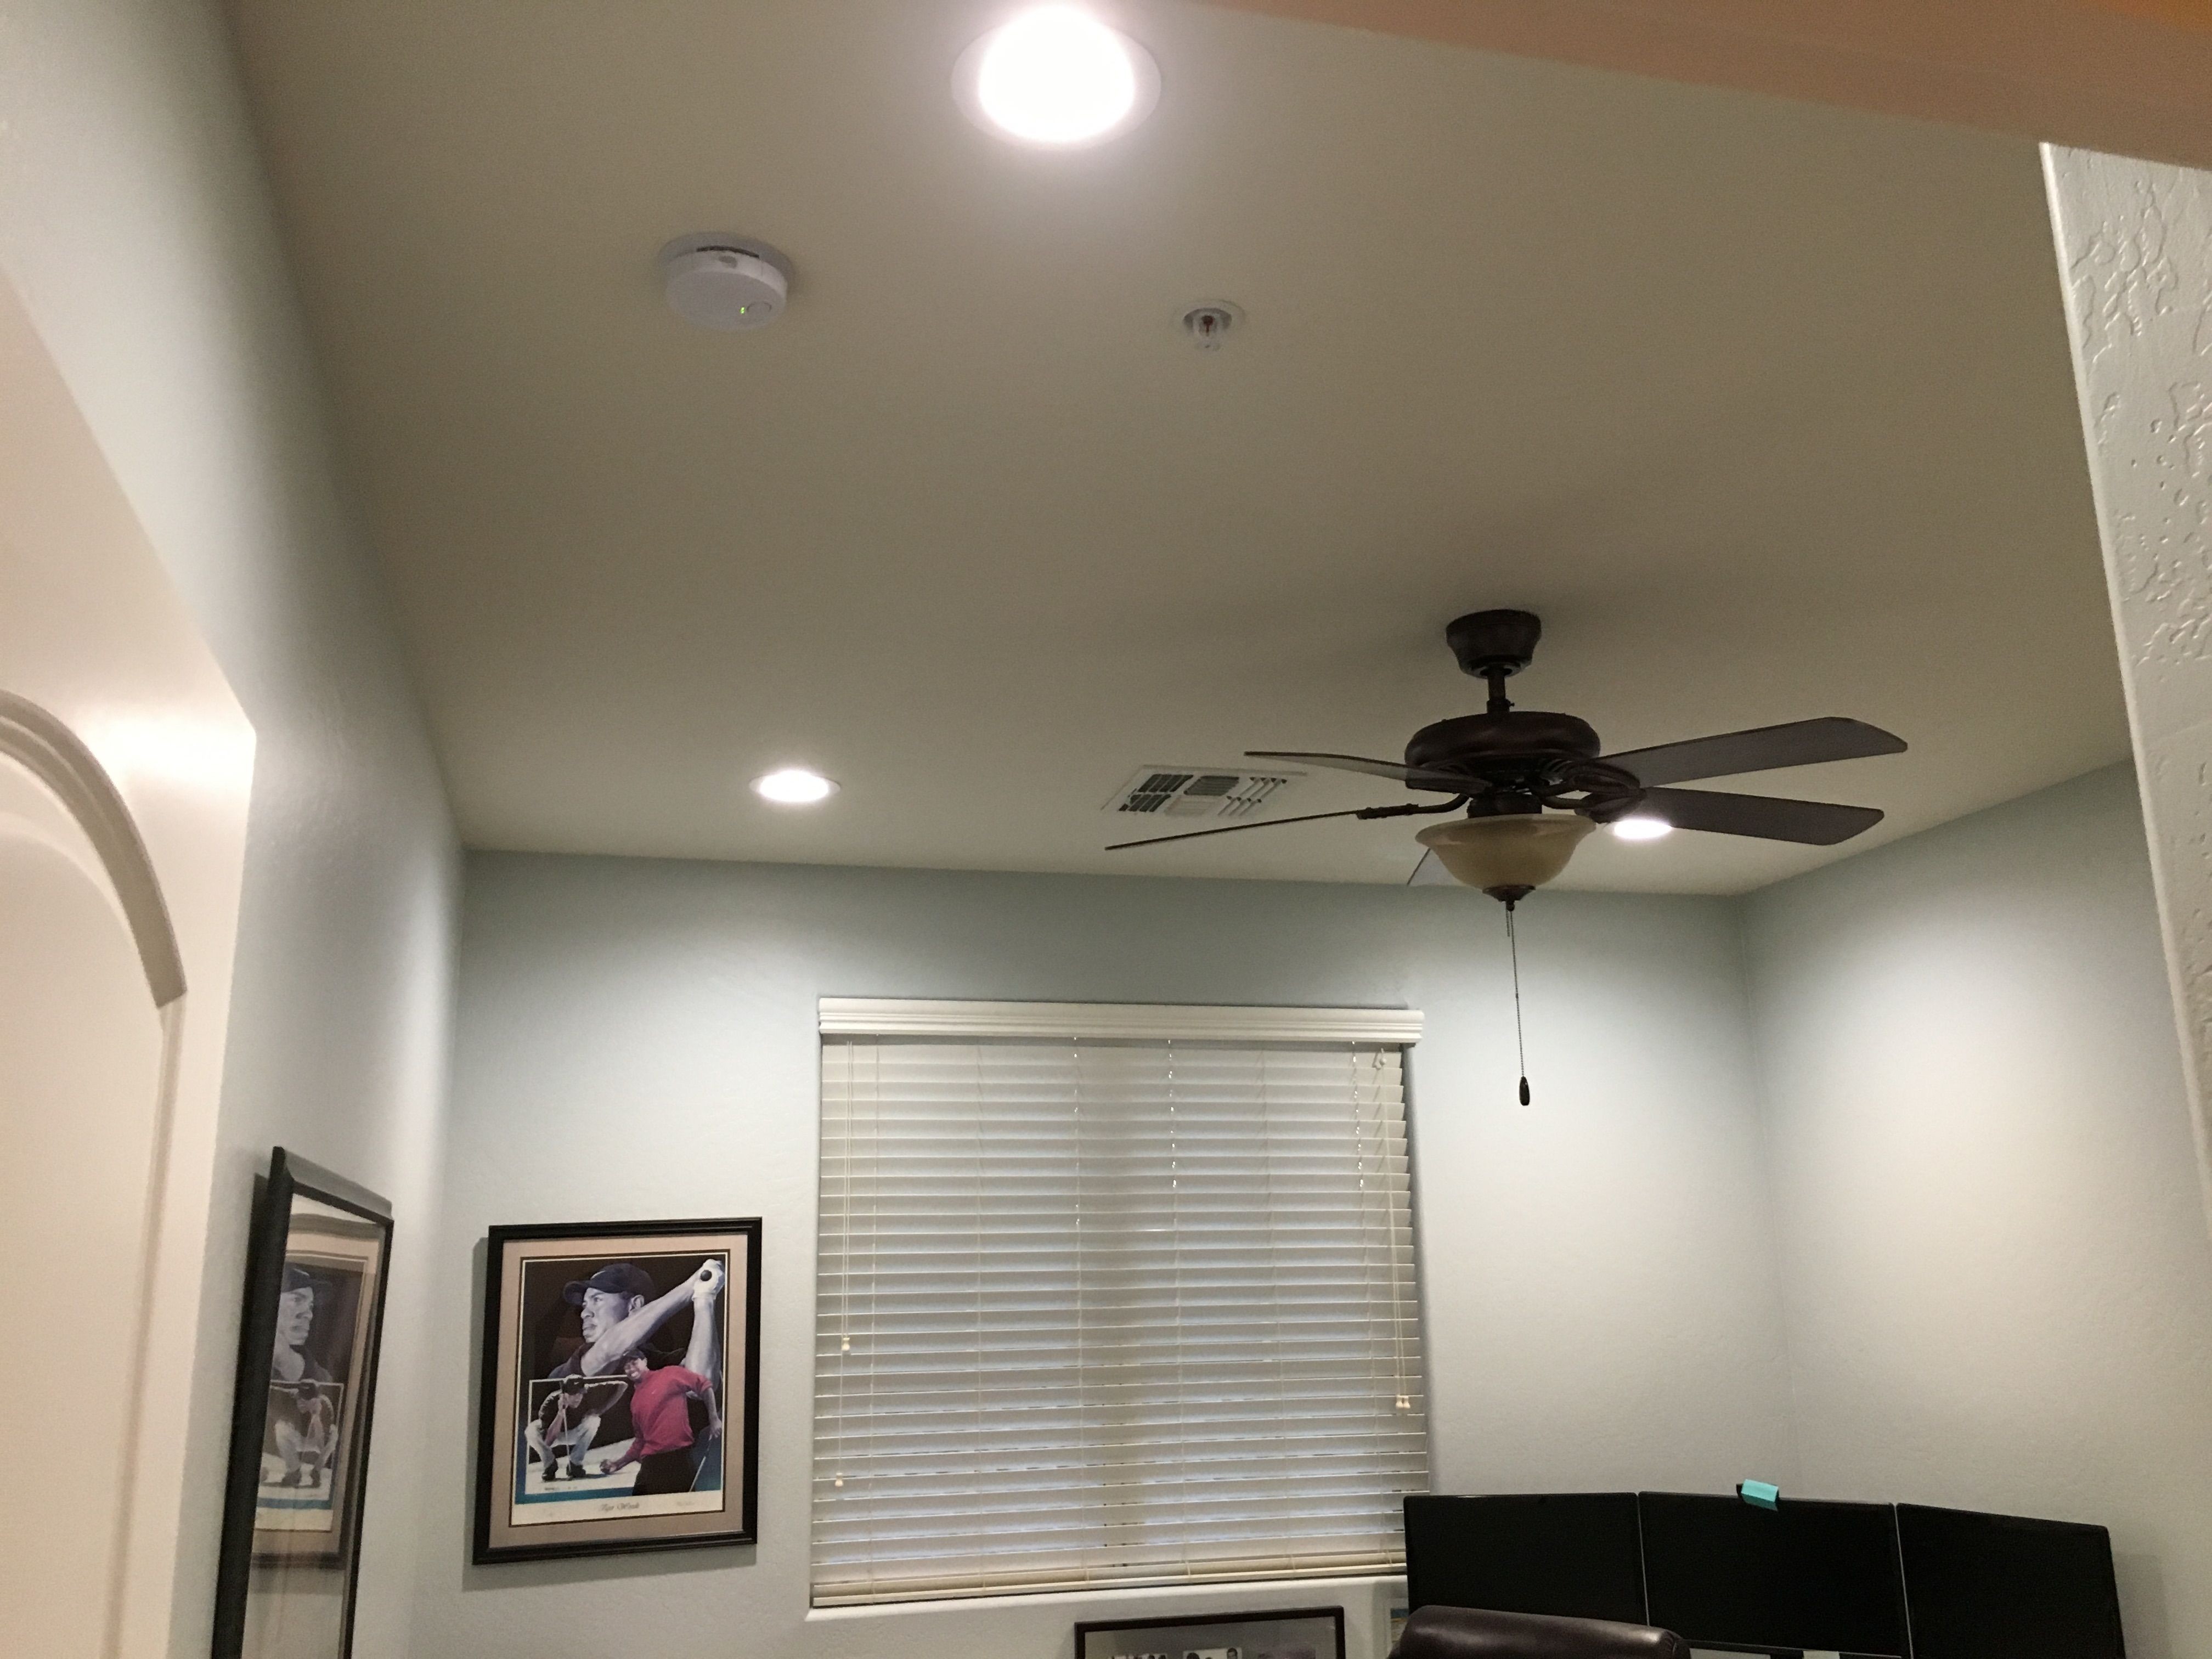 Installed 4x 6 inch 4000k LED recessed lights in a home office